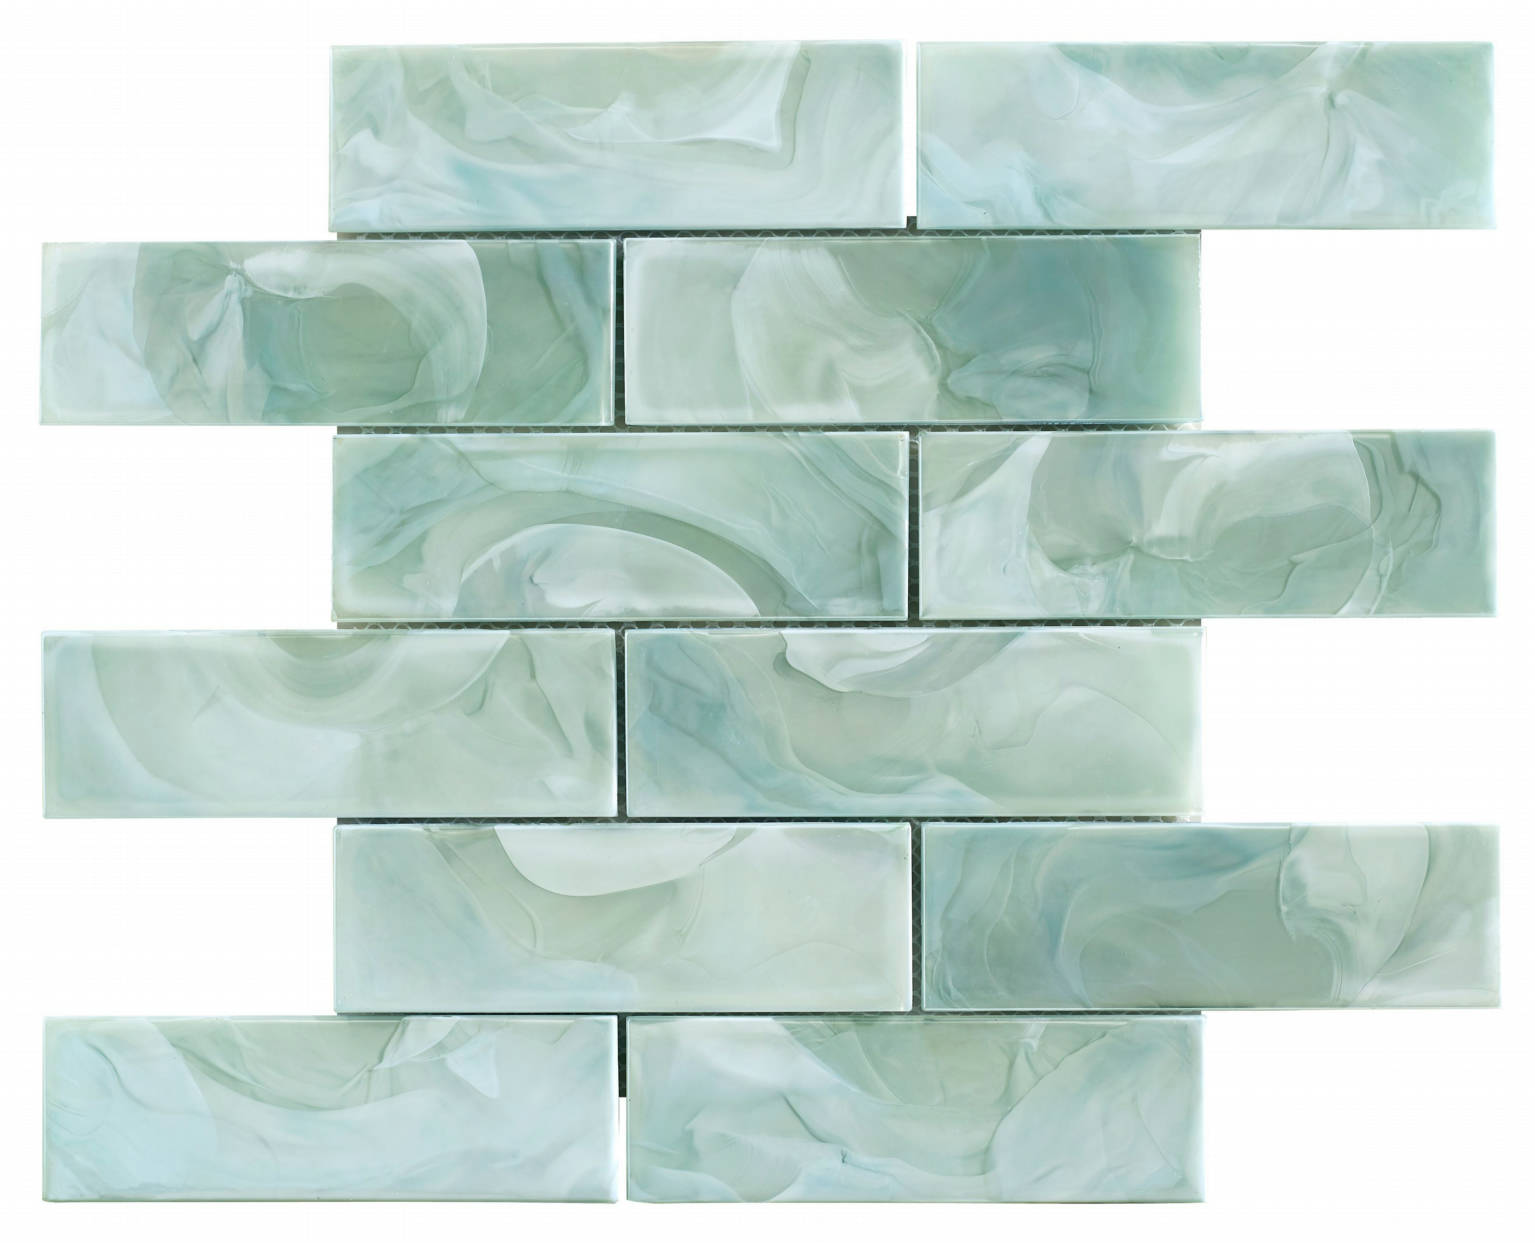 TRH0603S | Stones And More | Finest selection of Mosaics, Glass, Tile and Stone